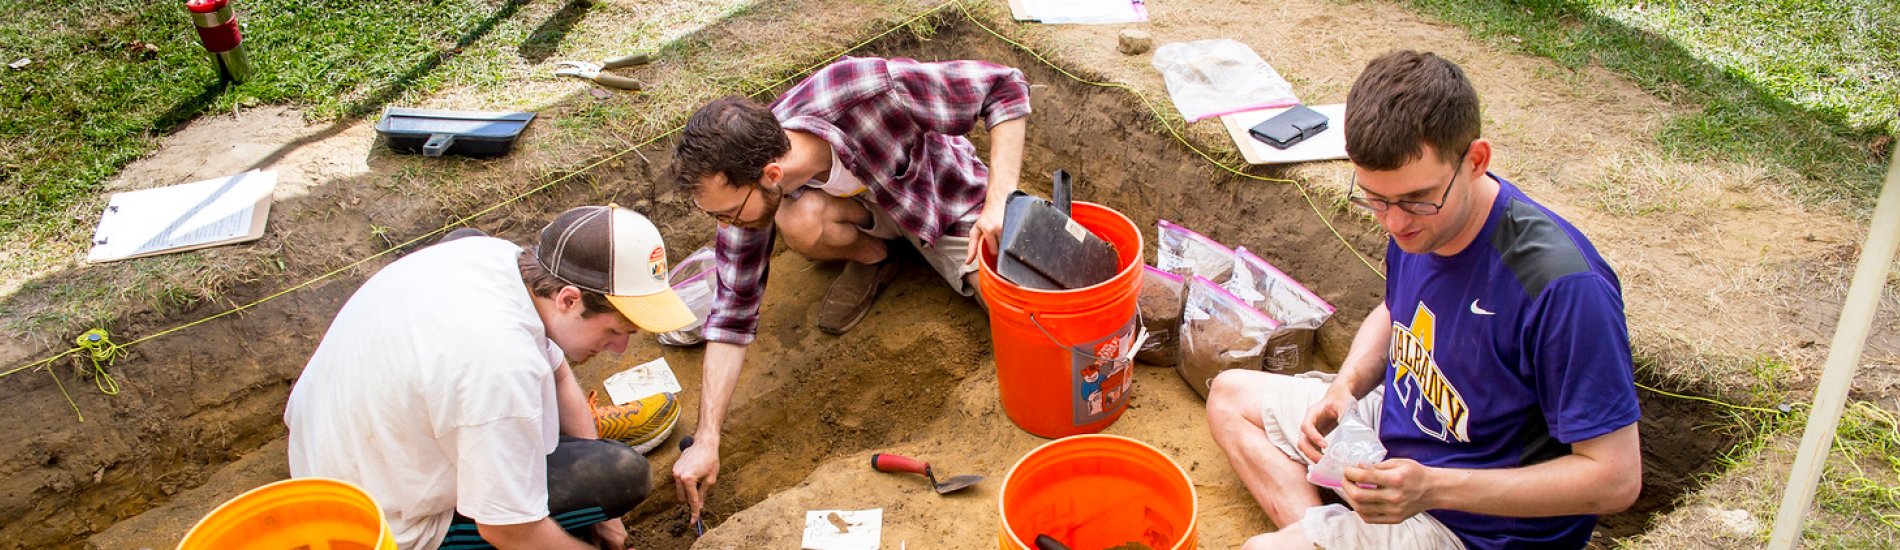 UAlbany students participate in an archaeological dig at the Ten Broeck Mansion in Albany, NY